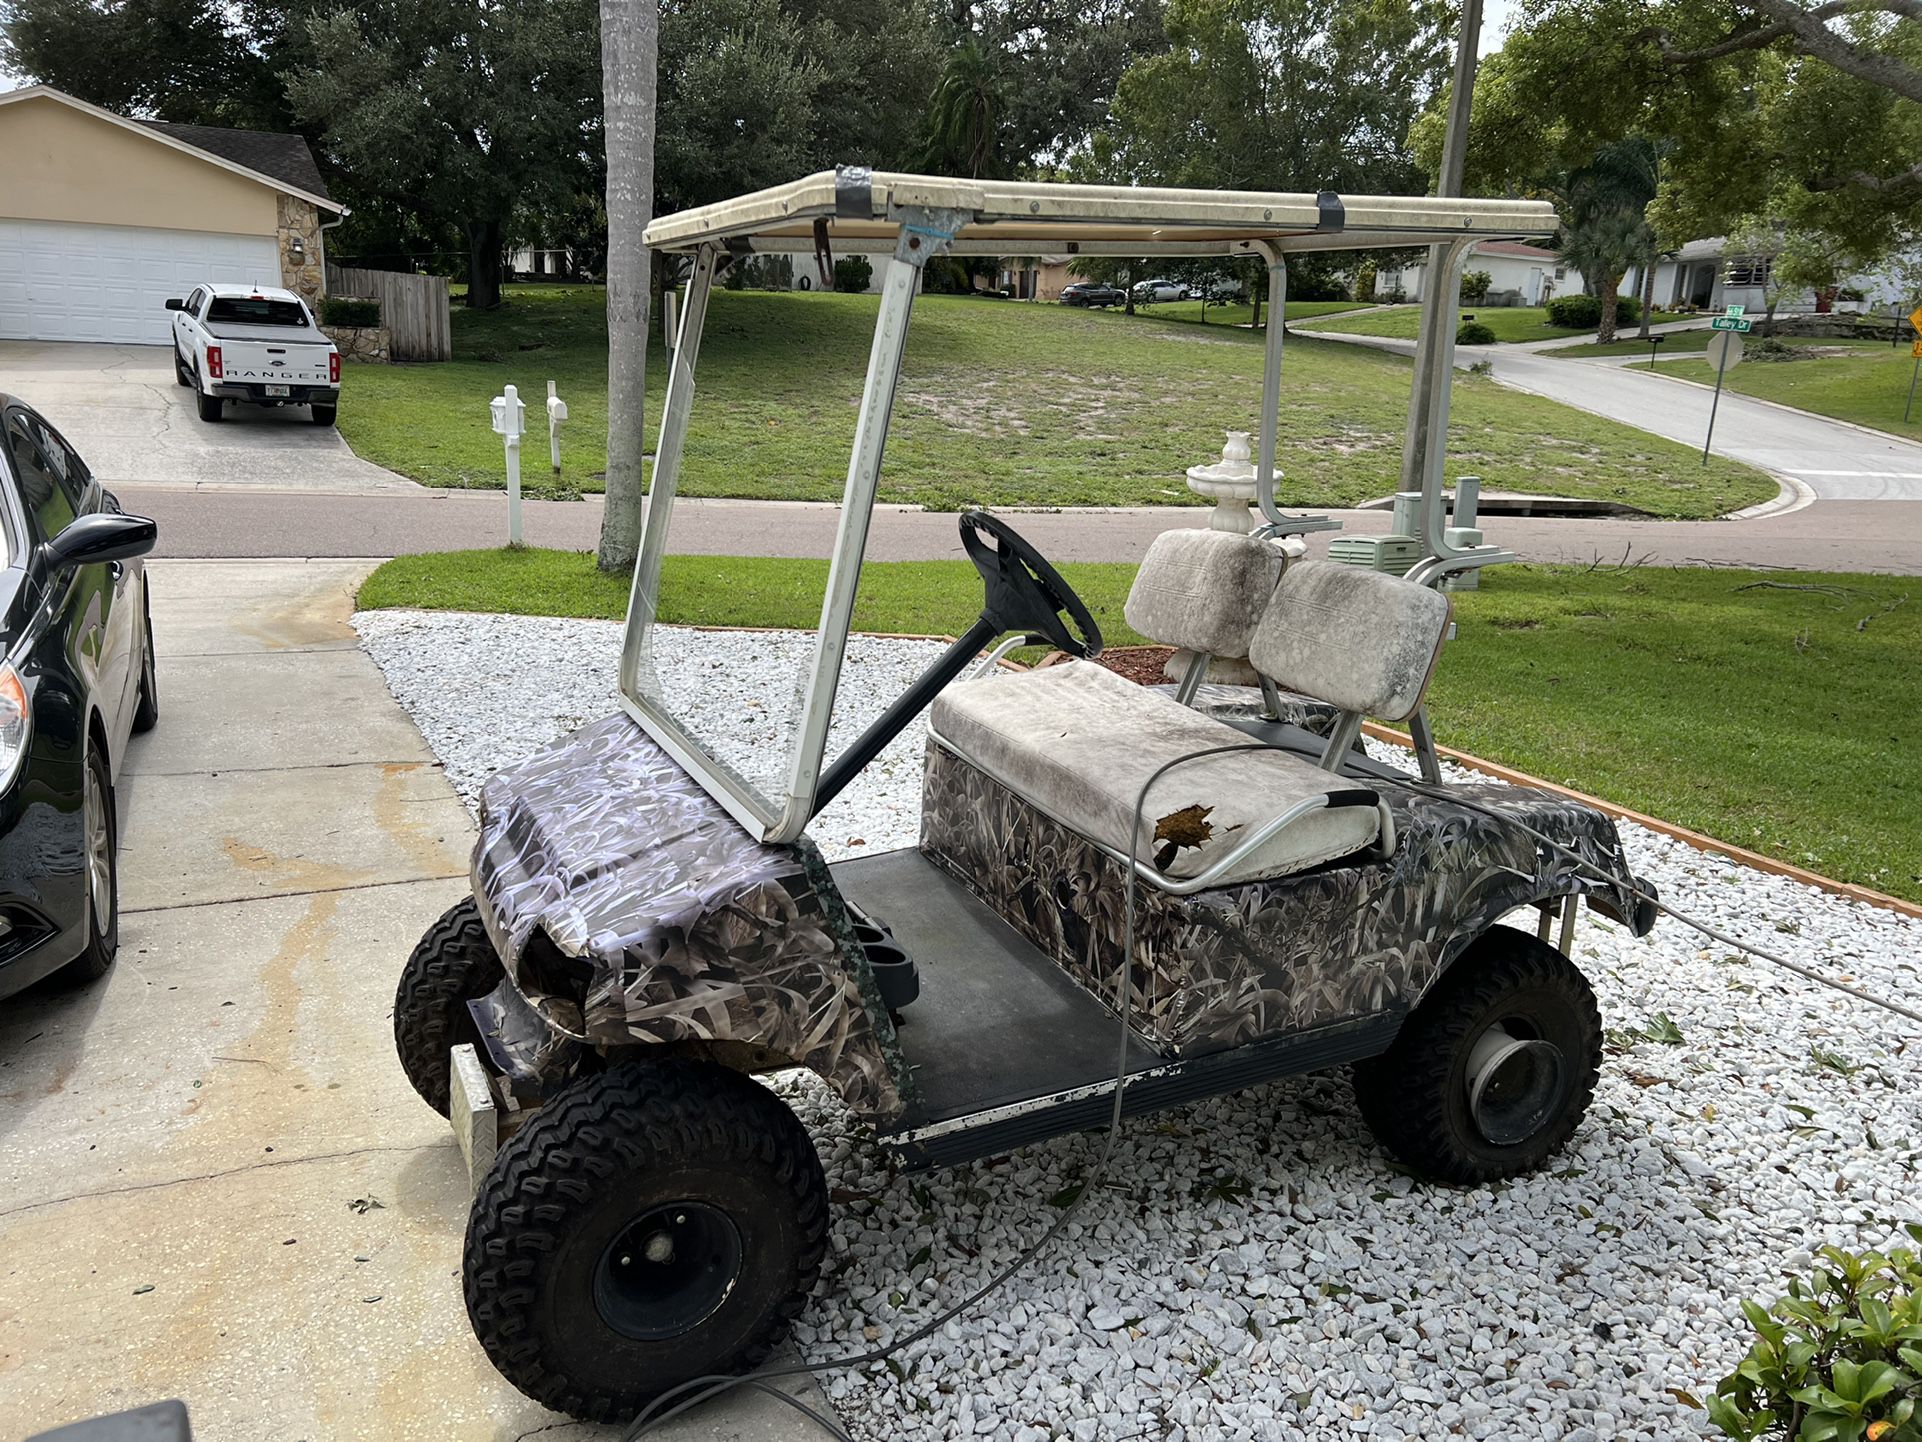 1999 Club Car Lifted Golf Car Needs everything except for Electric Motor